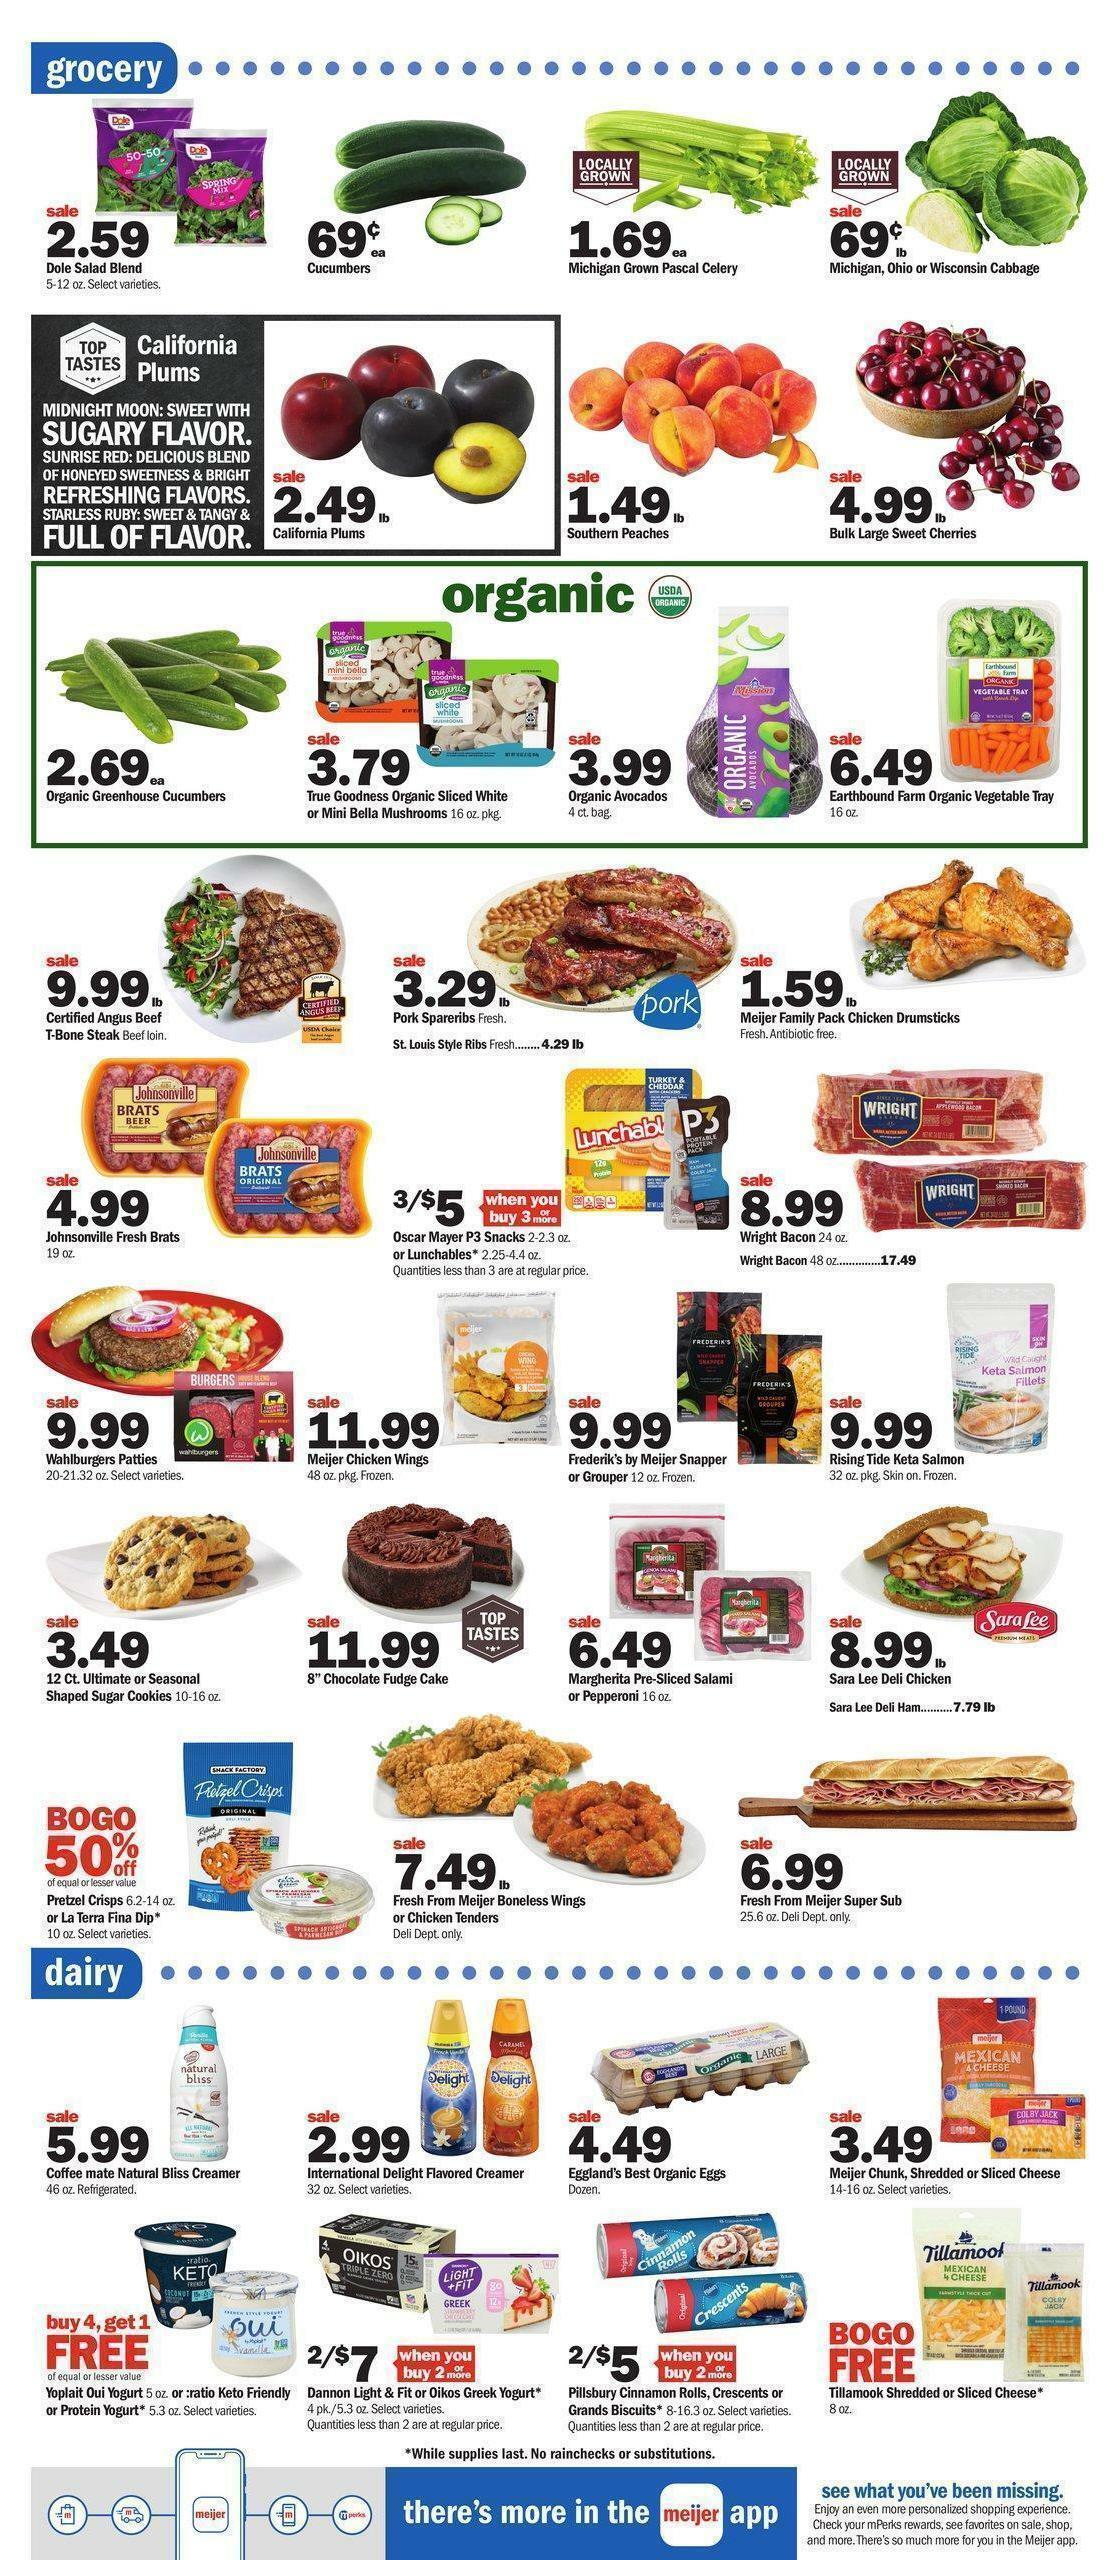 Meijer Weekly Ad from July 17